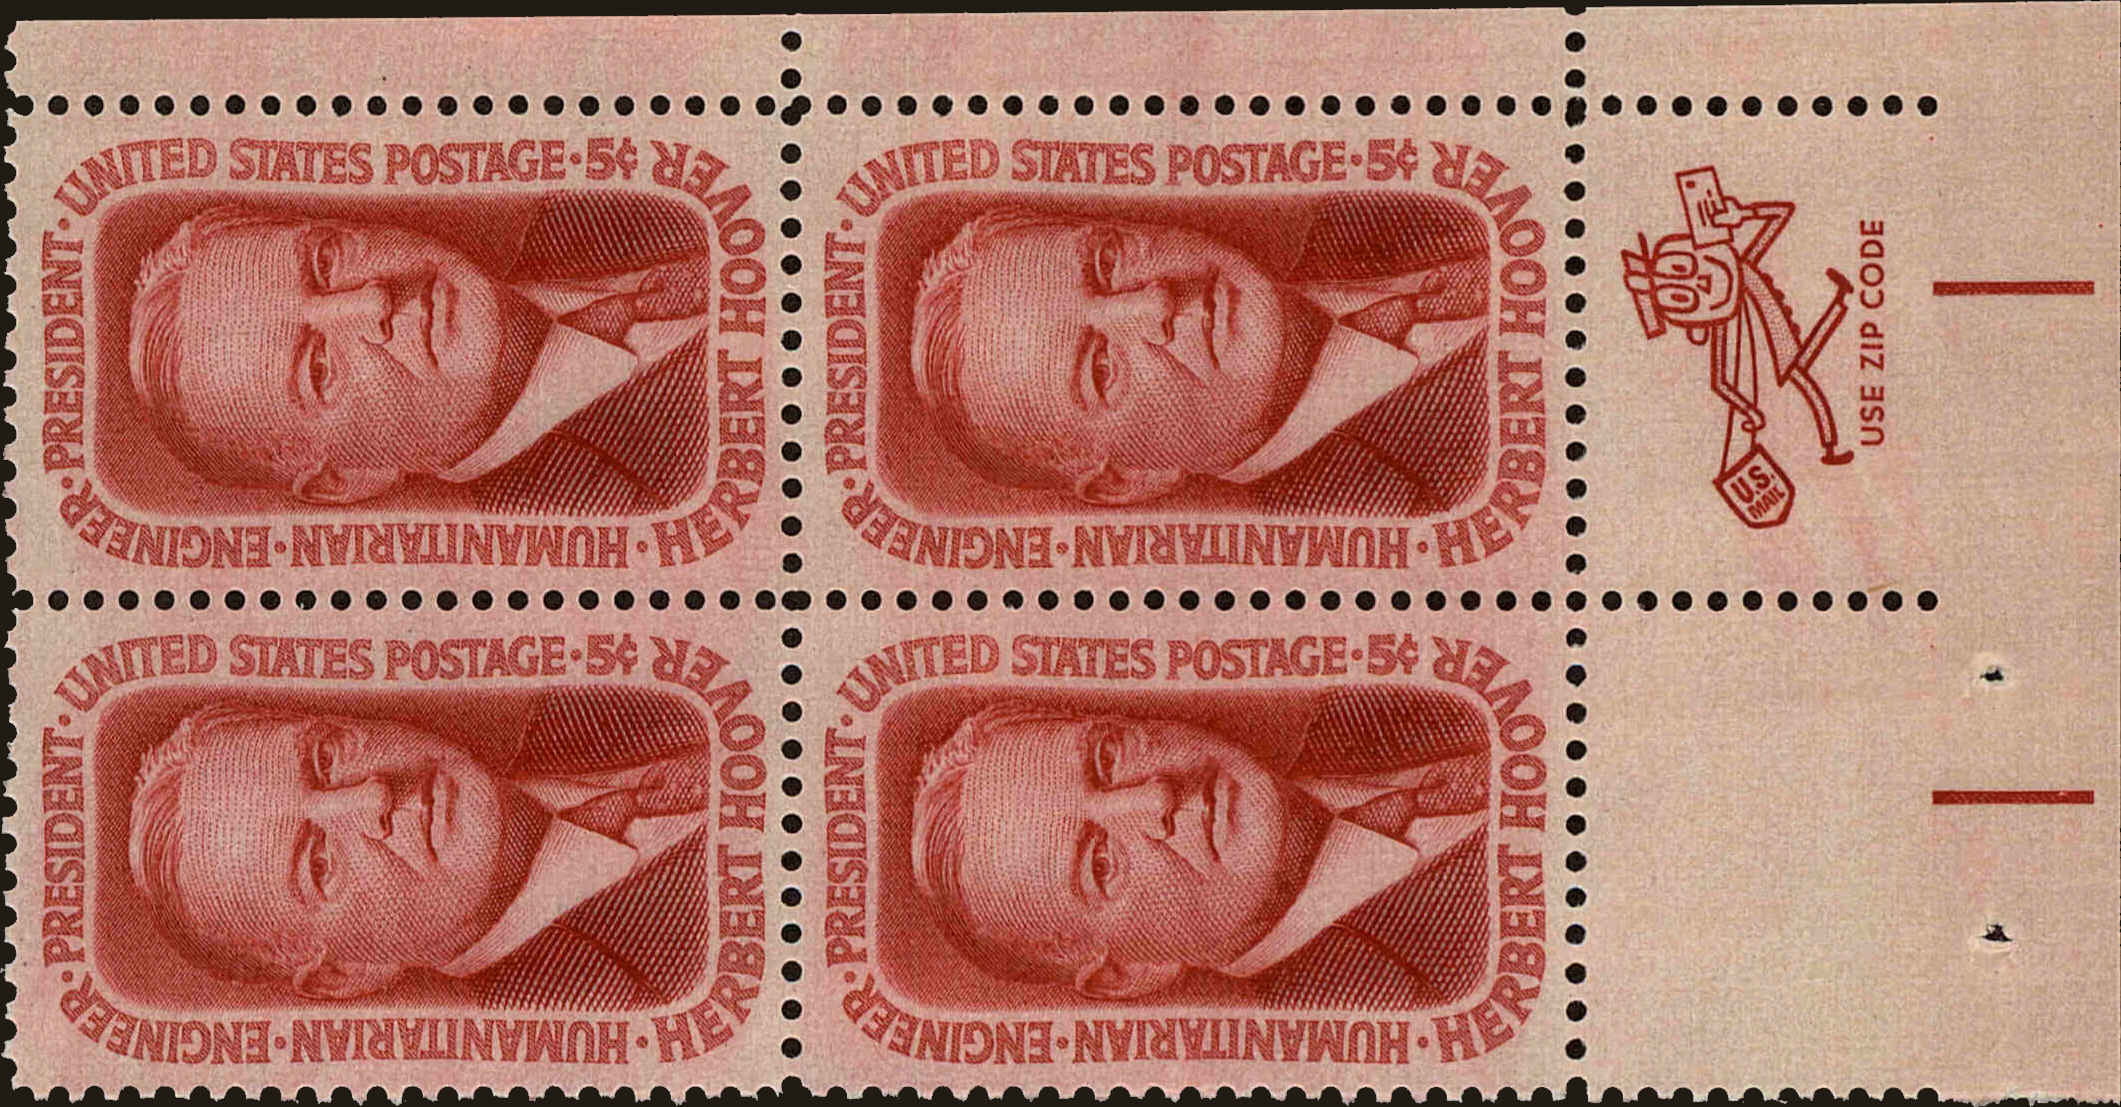 Front view of United States 1269 collectors stamp